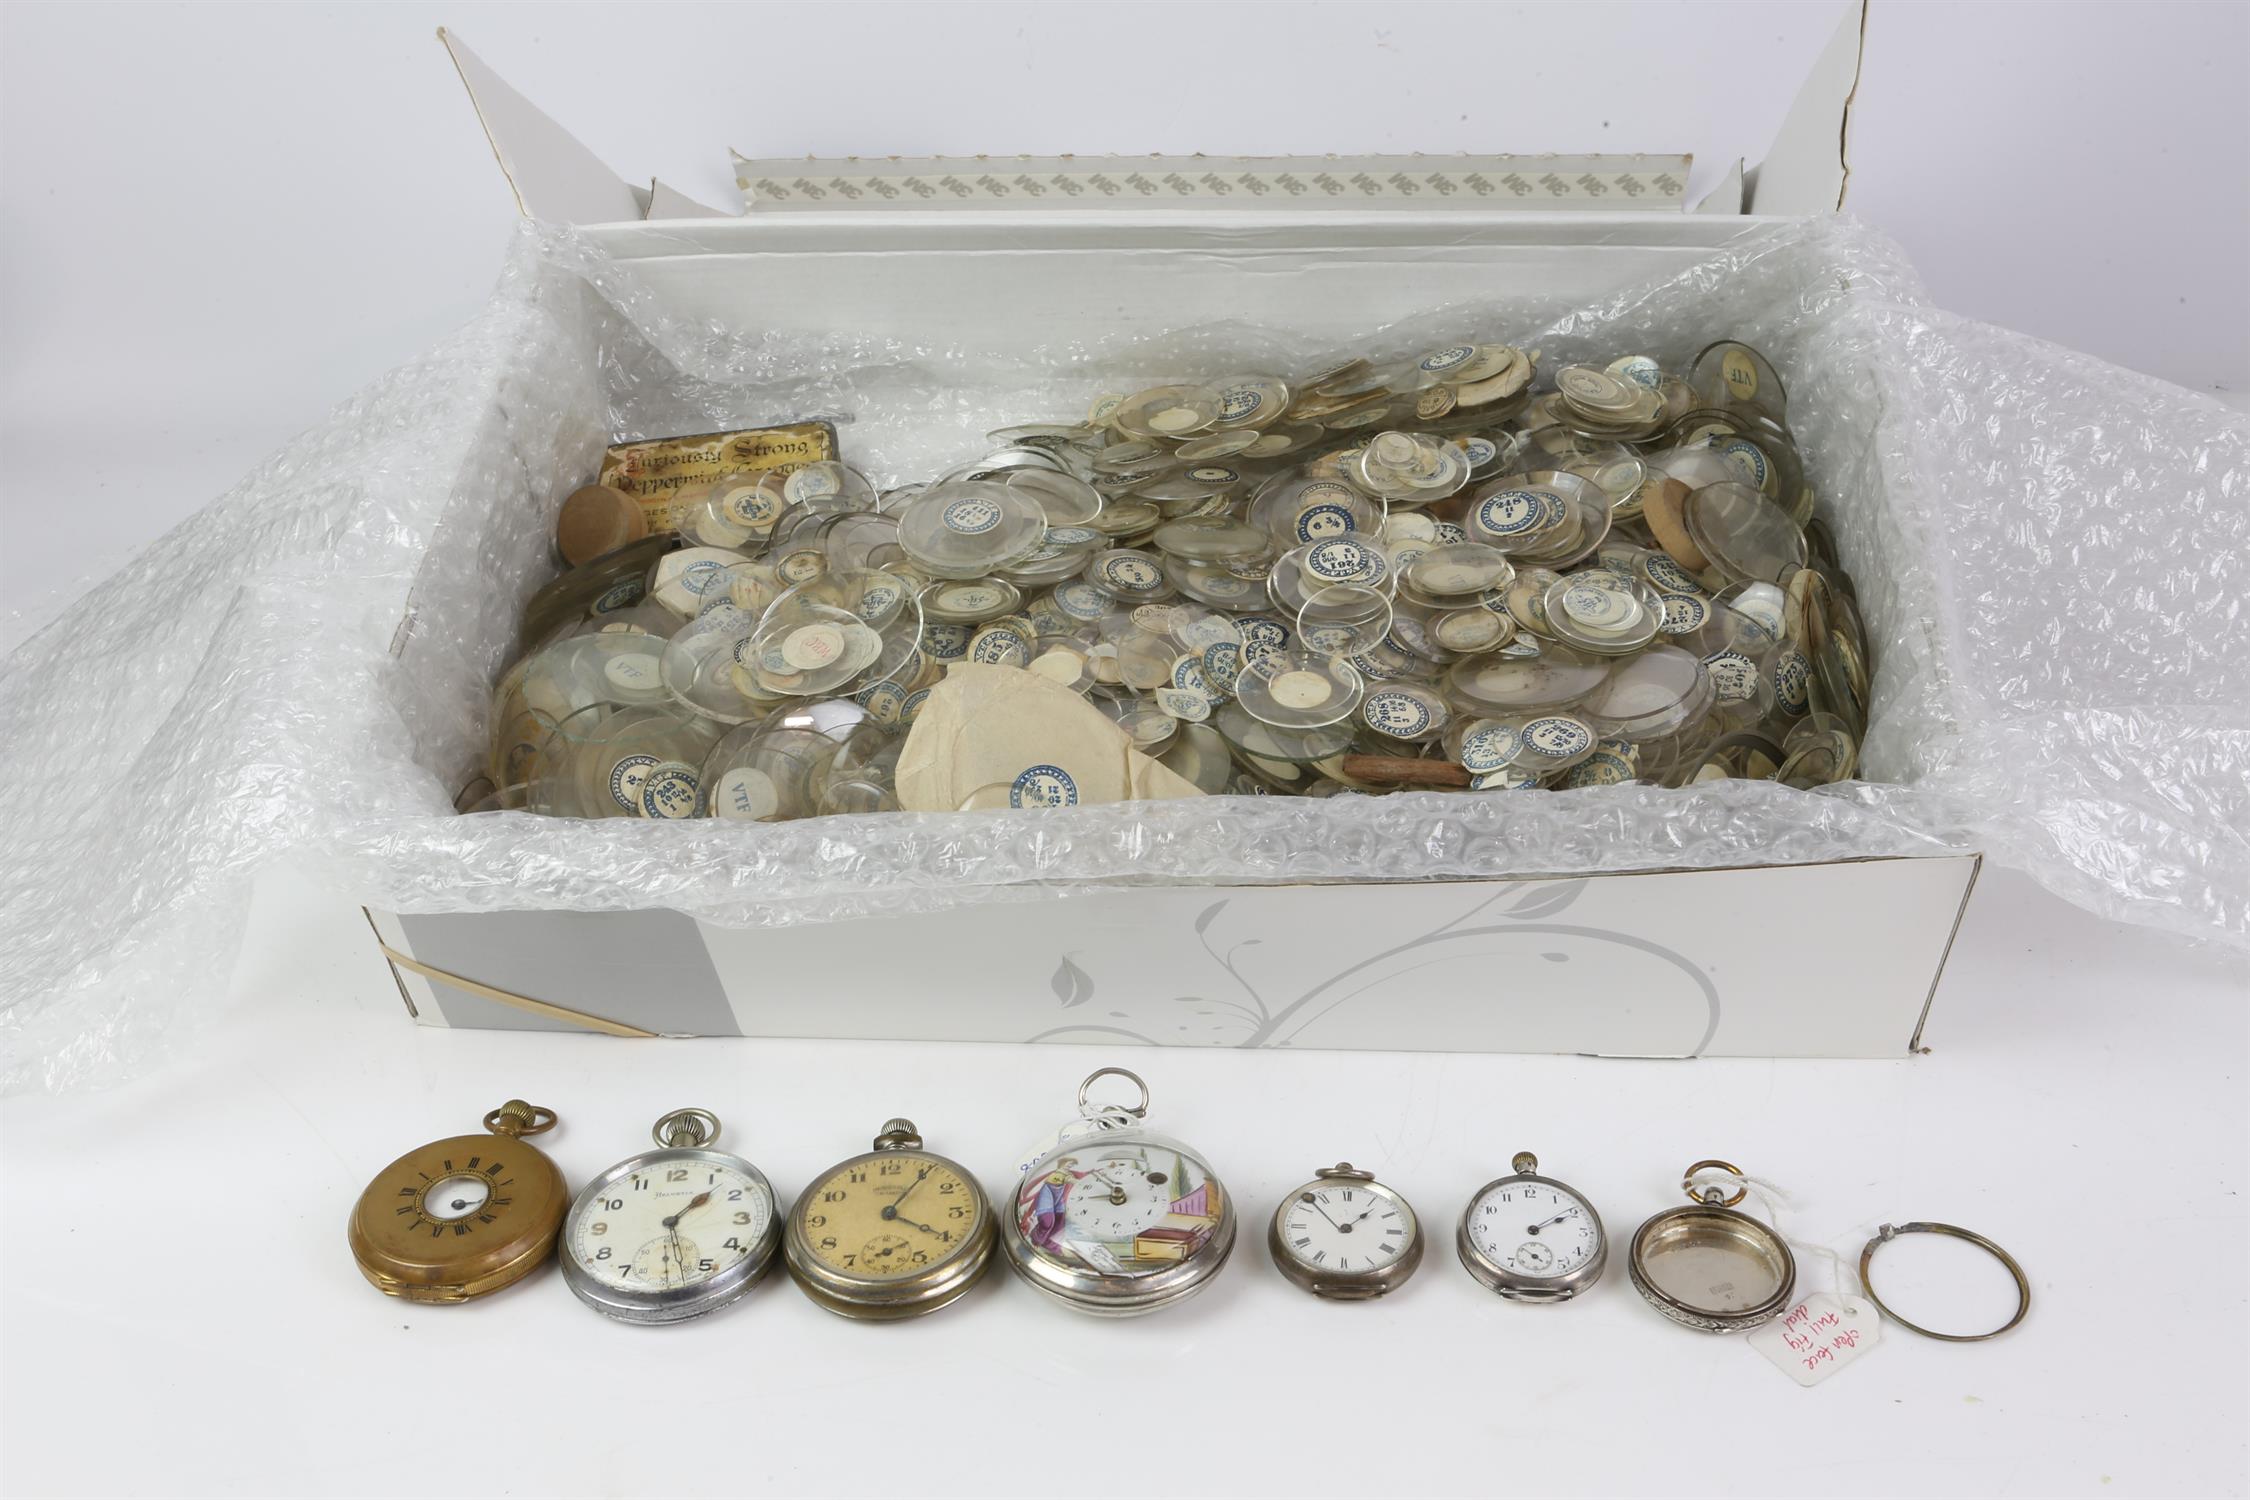 Six pocket watches, including an enamel pocket watch with a key wind movement, a Helvetia open